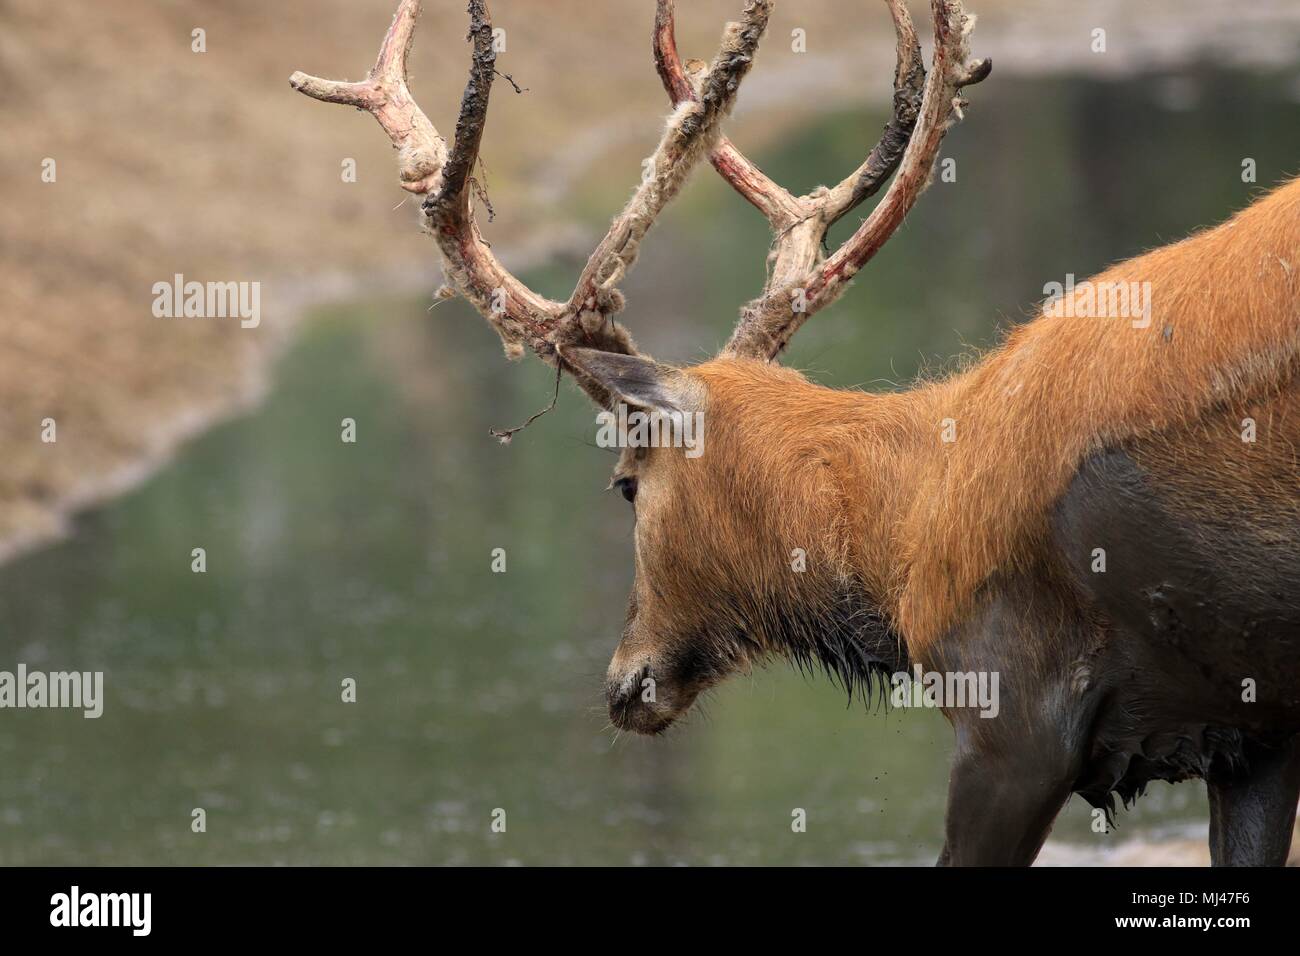 May 4, 2018 - Yancheng, Yancheng, China - Yancheng, CHINA-4th May: The PÃƒÂ¨re David's deer in Yancheng,east China's Jiangsu Province, May 4th, 2018. The PÃƒÂ¨re David's deer (Elaphurus davidianus), also known as the milu or elaphure, is a species of deer that are mostly found in captivity. This semiaquatic animal prefers marshland, and is native to the subtropics of China. It grazes mainly on grass and aquatic plants. It is the only extant member of the genus Elaphurus. (Credit Image: © SIPA Asia via ZUMA Wire) Stock Photo